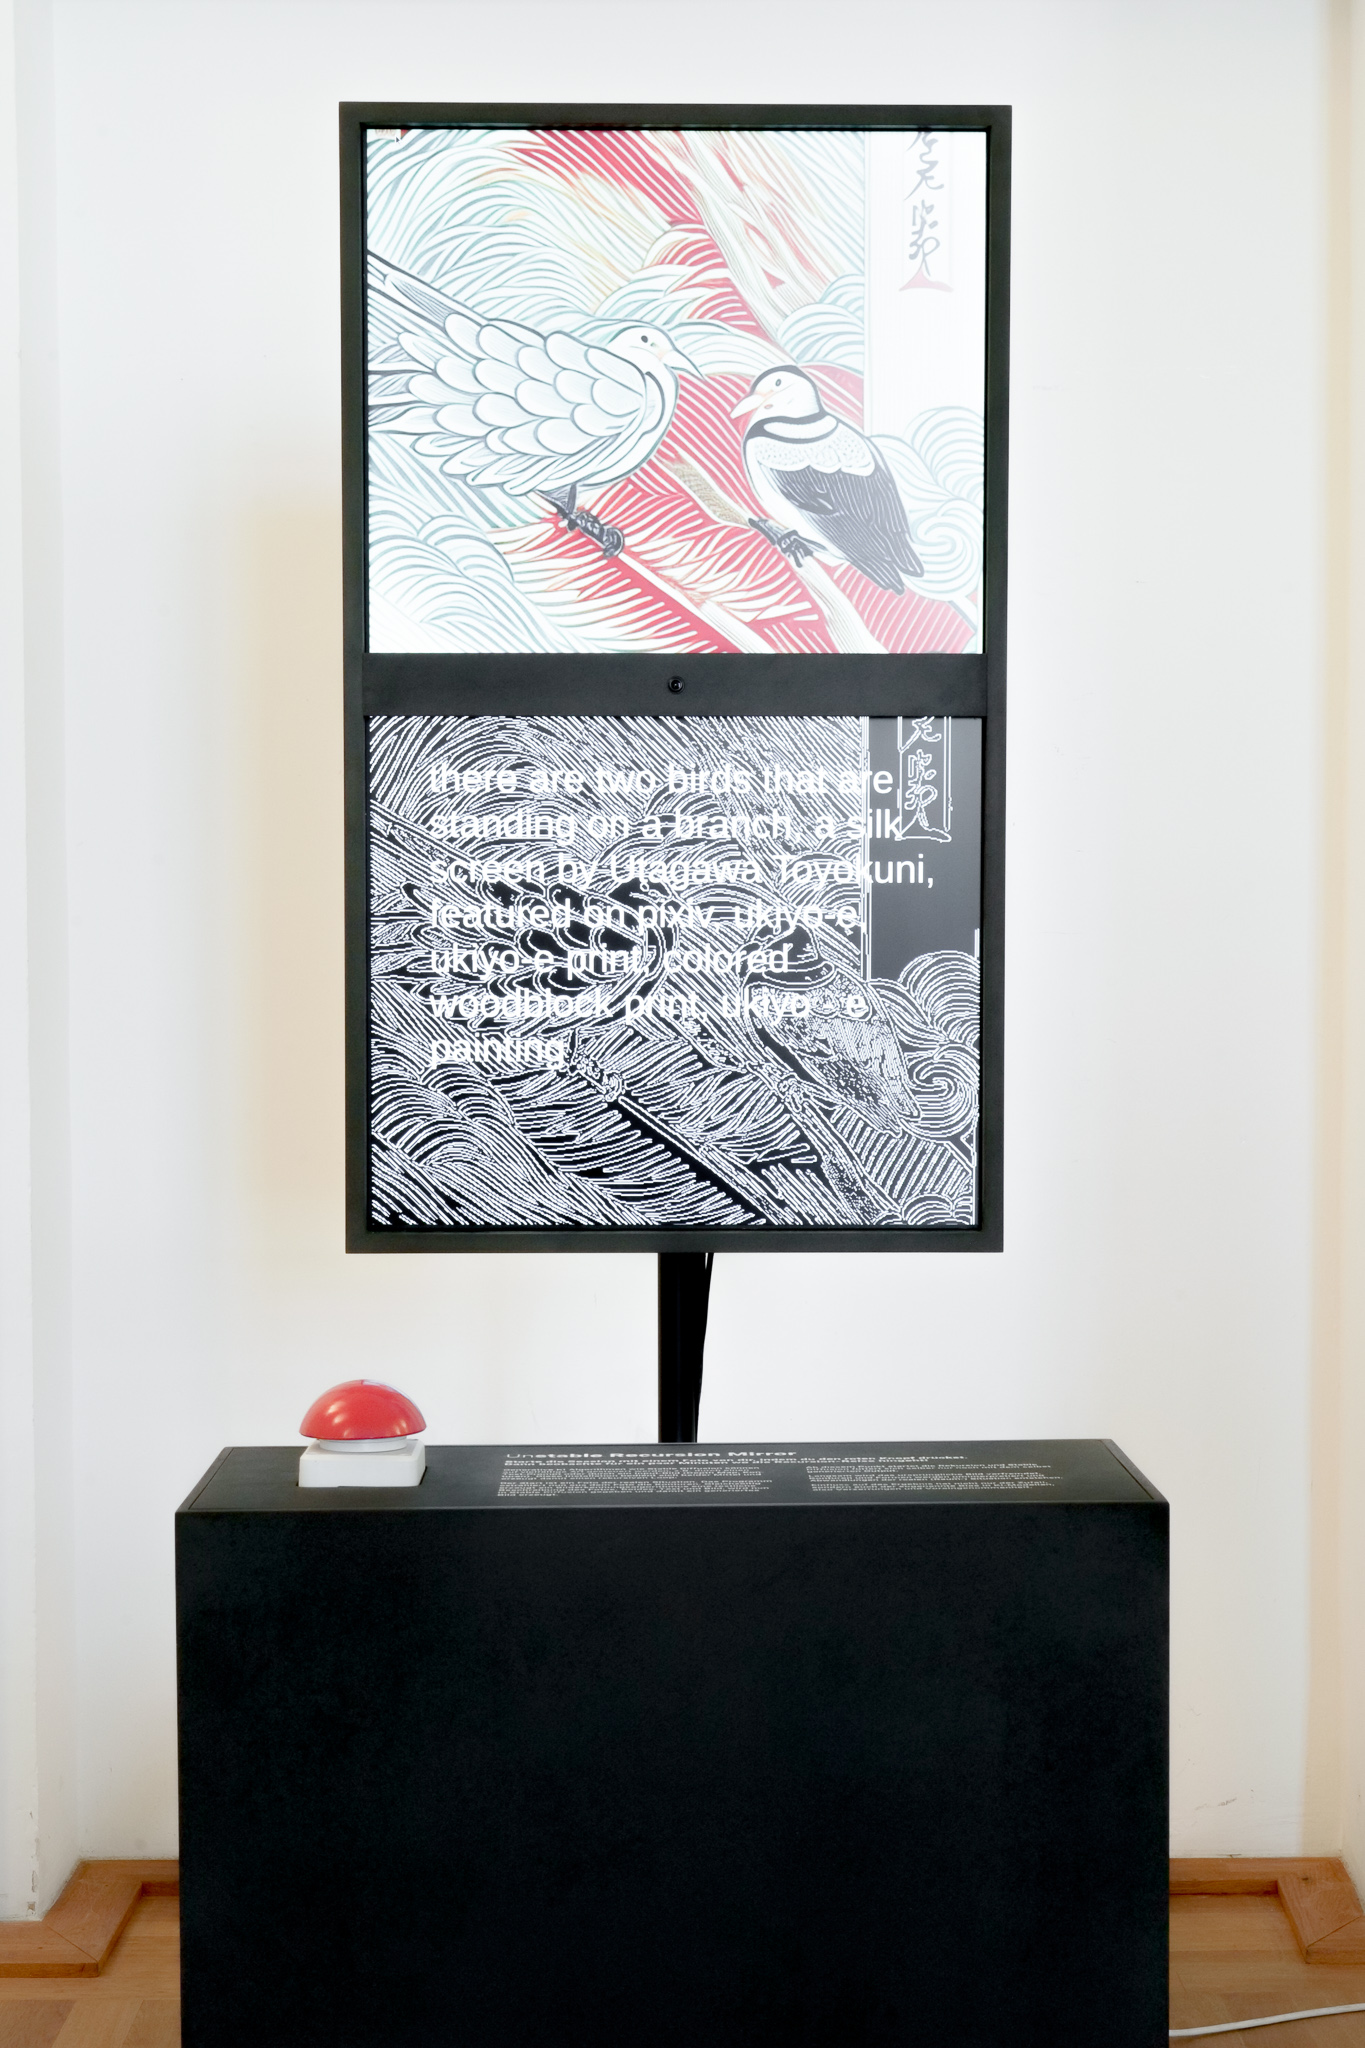 Mixed Media Installation: 60cm × 110cm custom built display frame with integrated camera, 60cm x 100cm information panel with buzzer button, AI processing pipeline based on Stable Diffusion.